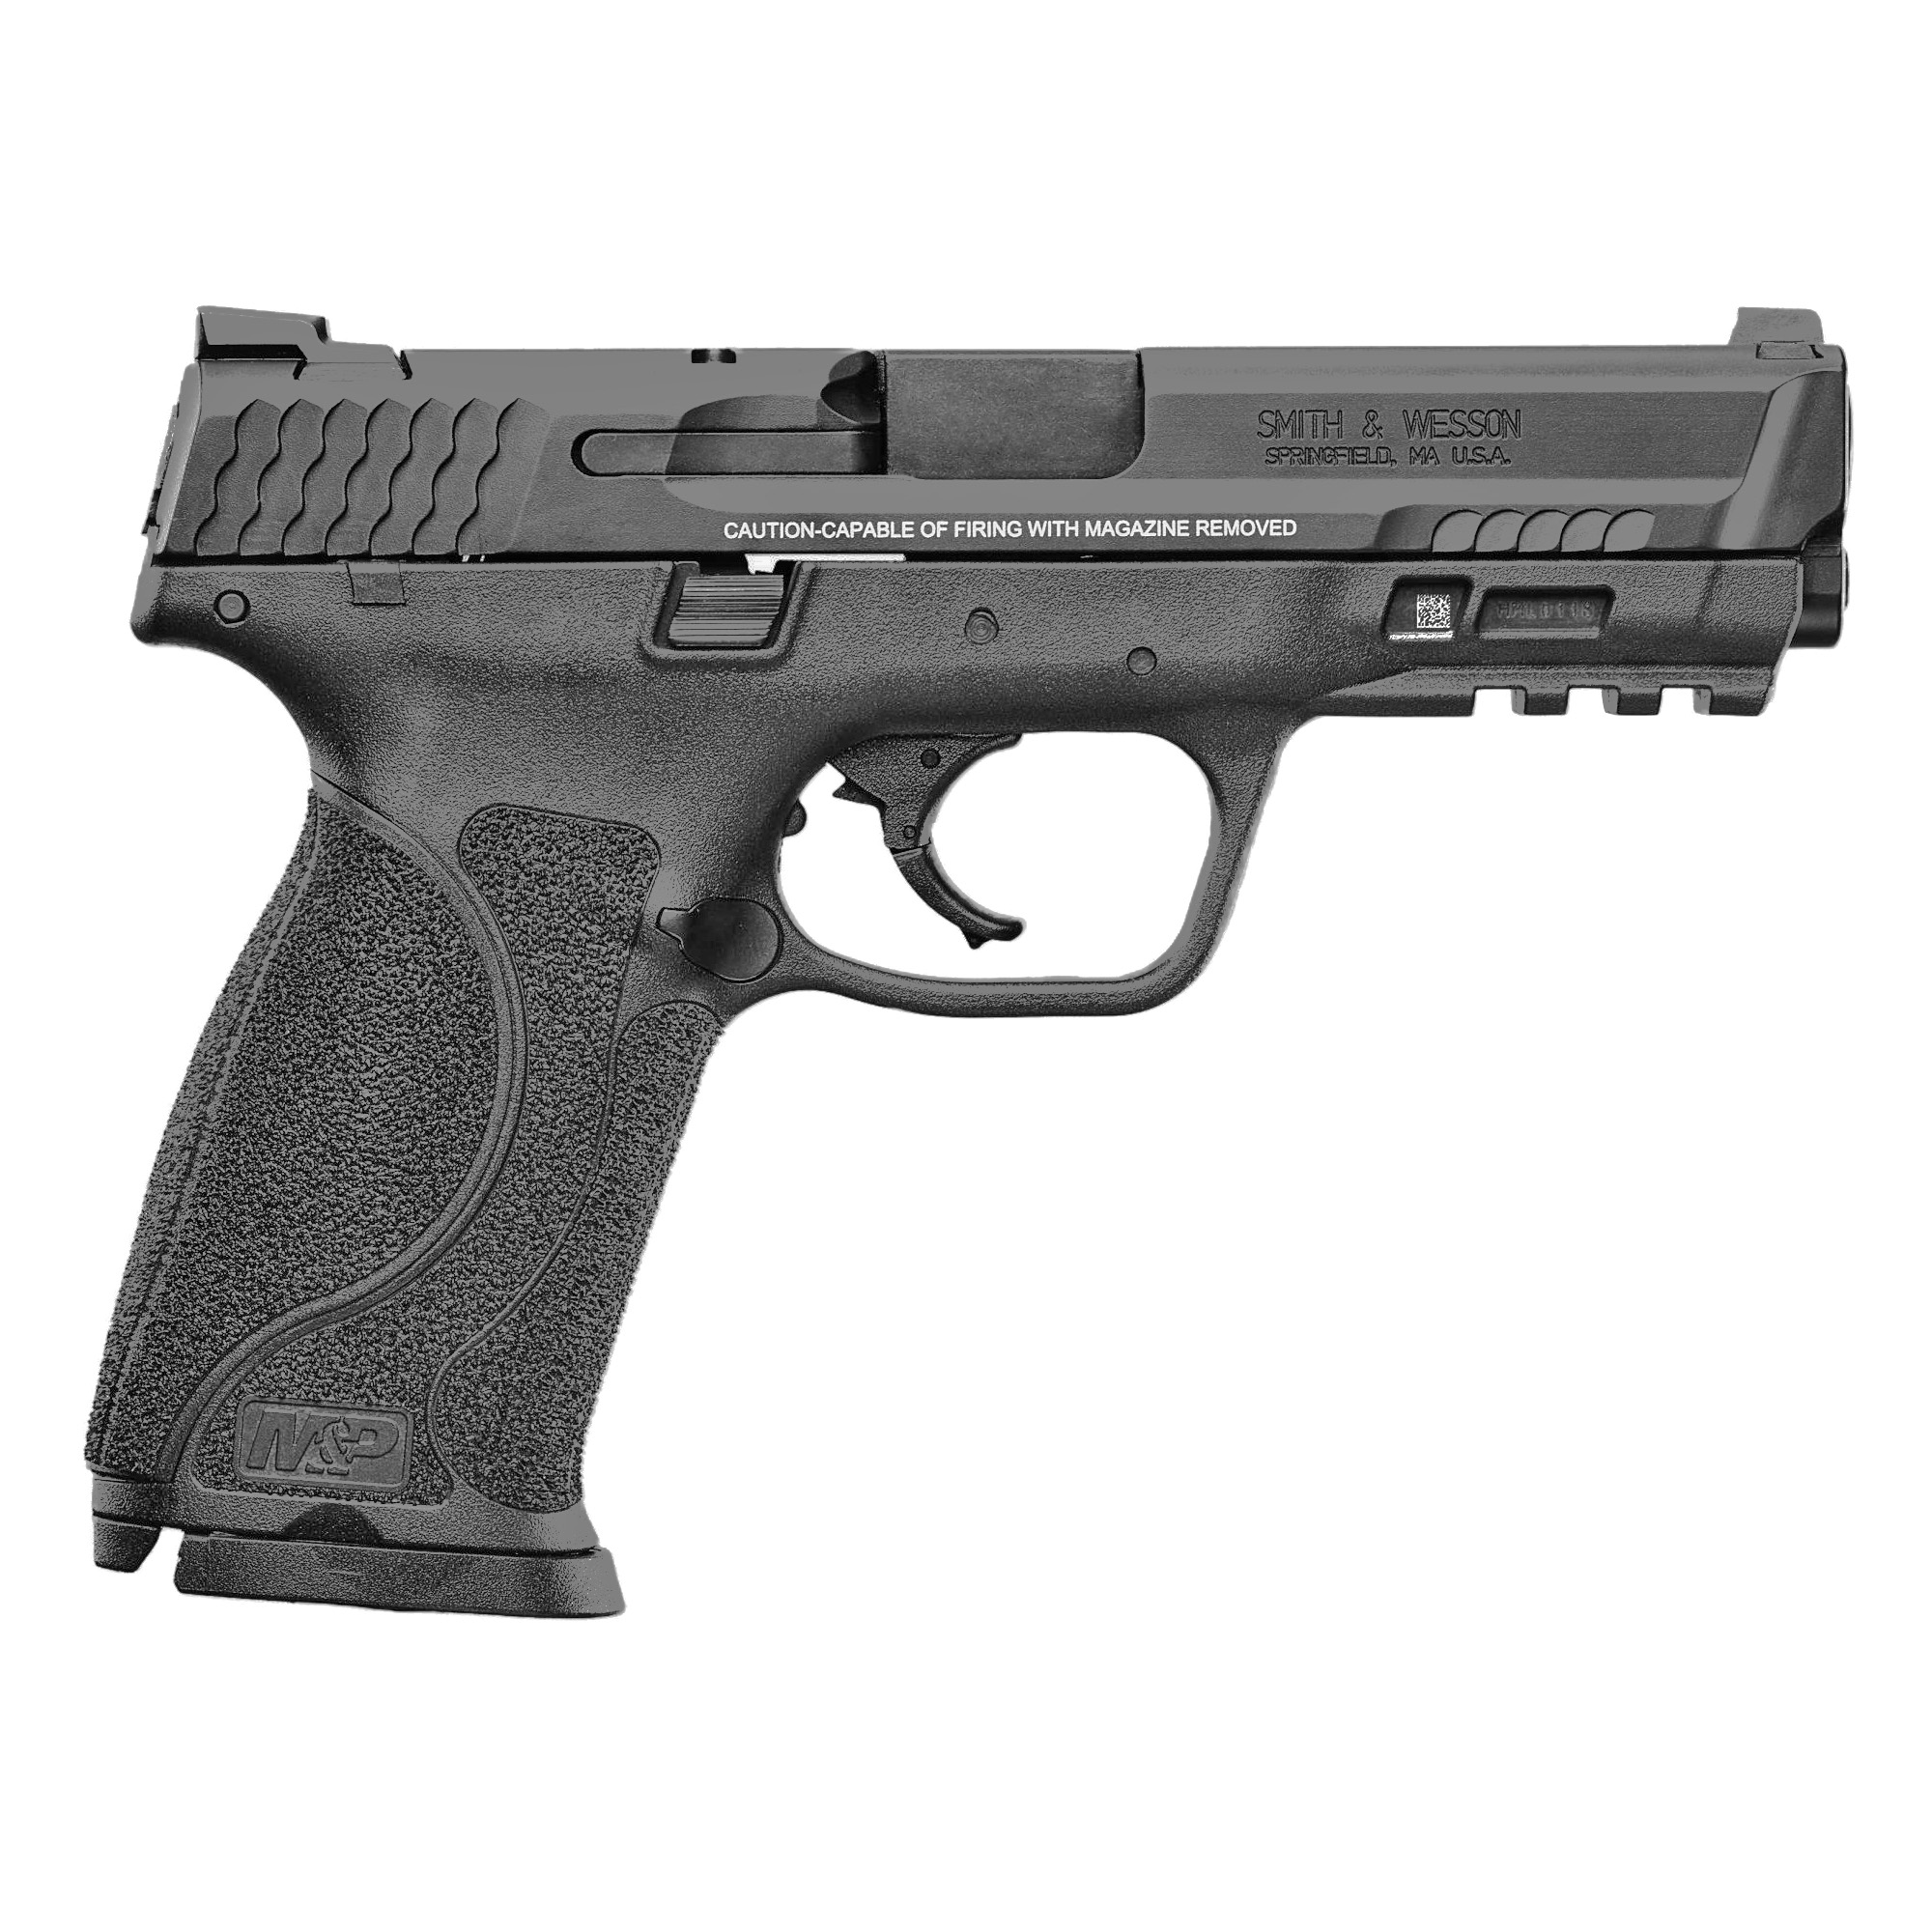 Smith & Wesson, M&P 2.0, Striker Fired, Semi-automatic, Polymer Frame Pistol, Full Size, 40 S&W, 4.25" Barrel, Armonite Finish, Black, Fixed Sights, No Magazine Safety, 15 Rounds, 2 Magazines